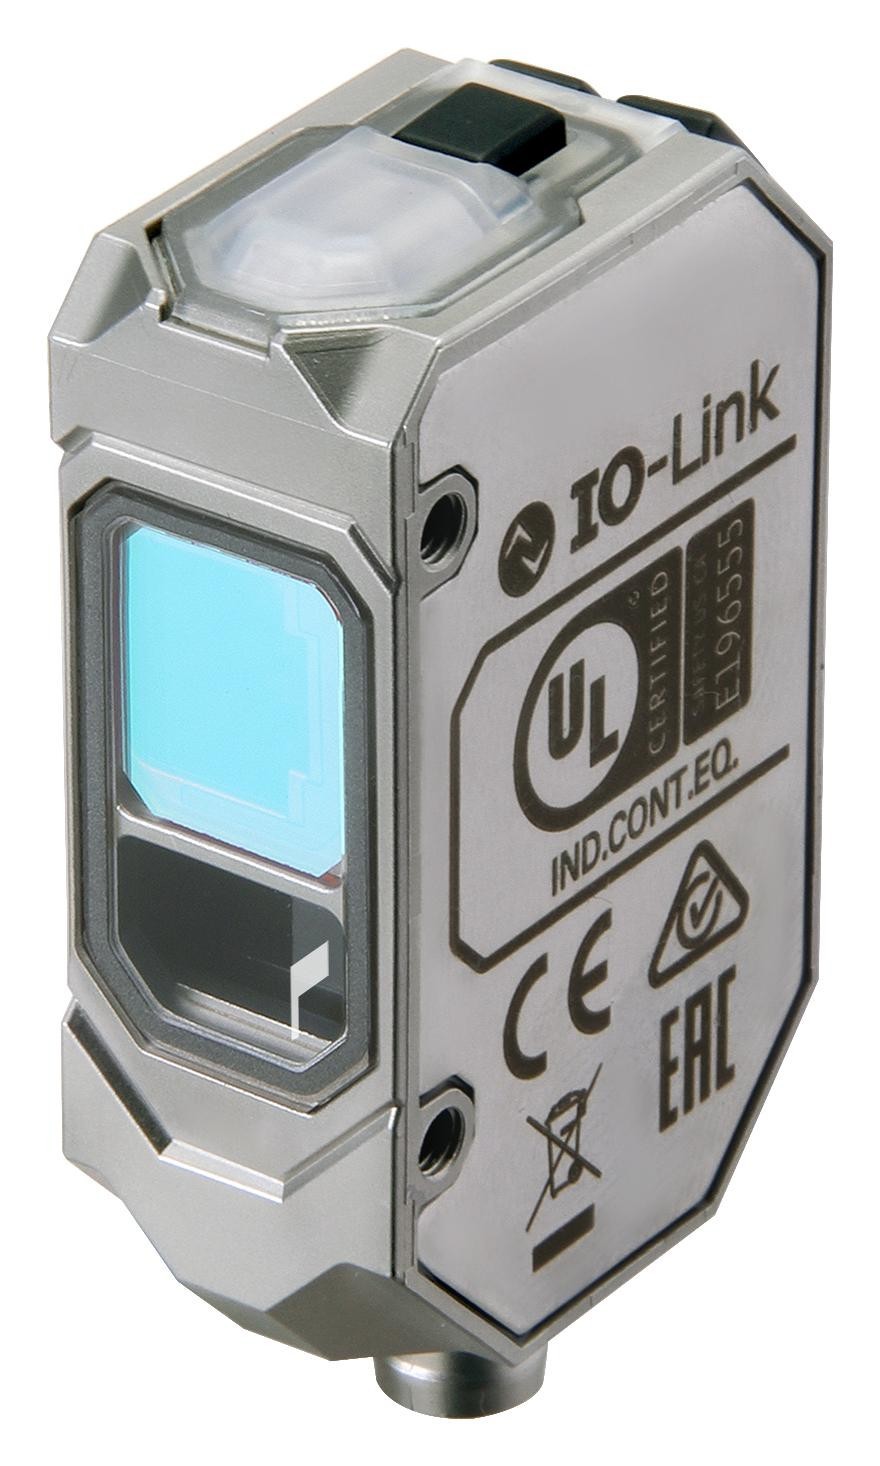 Omron Industrial Automation E3As-Hl150Mn M3 Photo Sensor, Triangulation, M8, 150mm